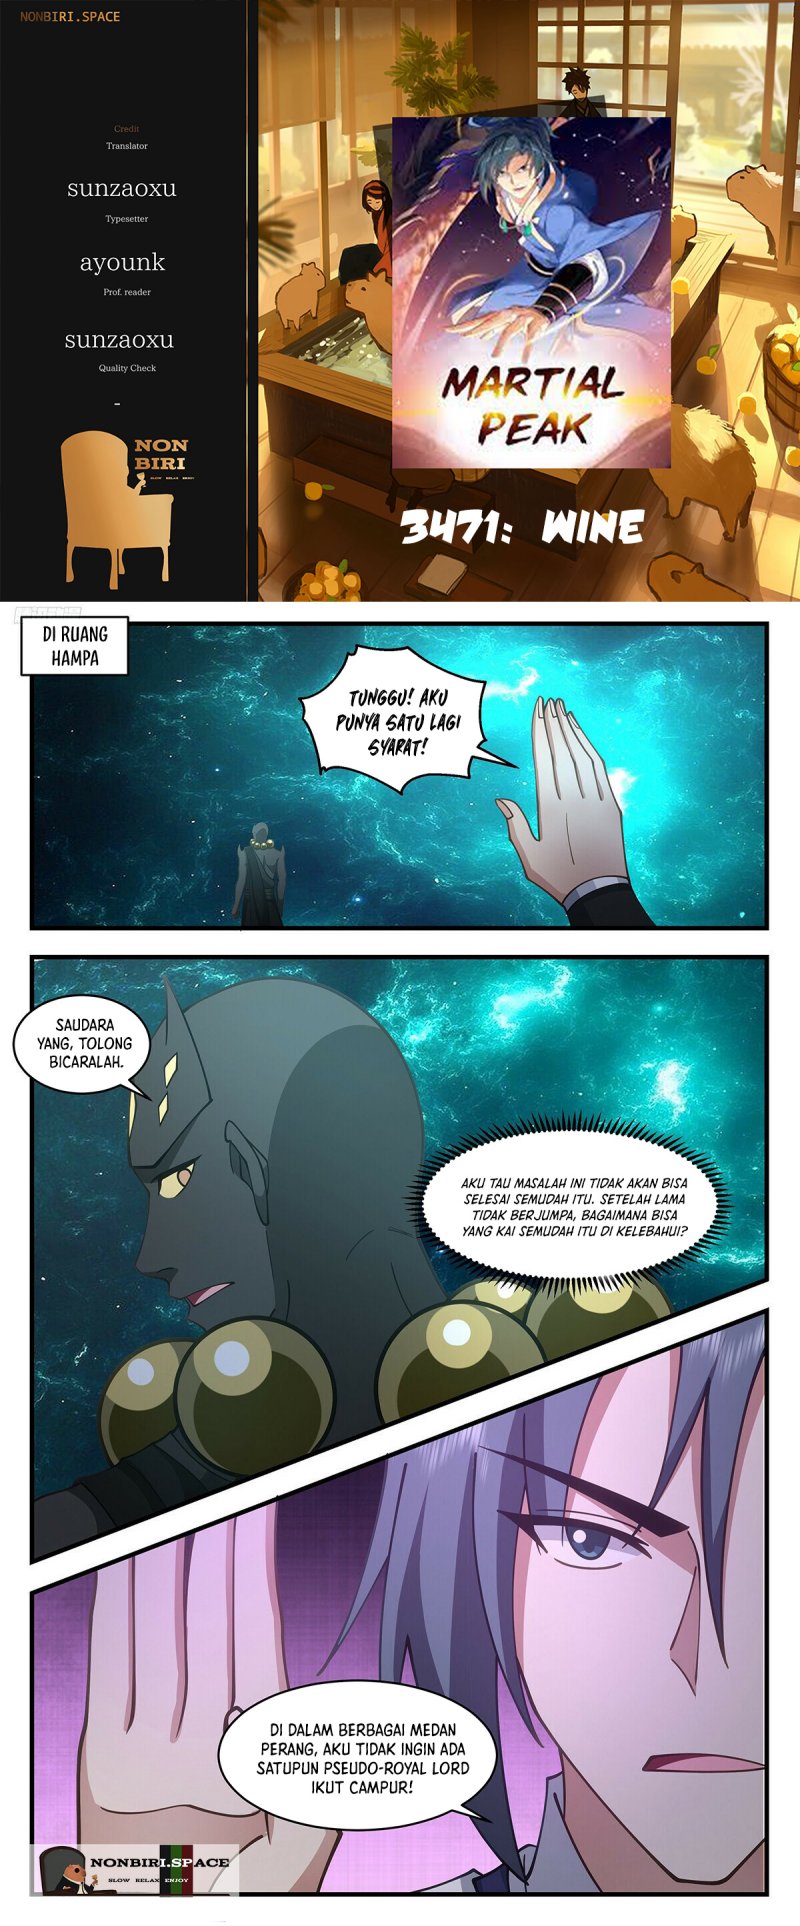 Martial Peak: Chapter 3471 - Page 1